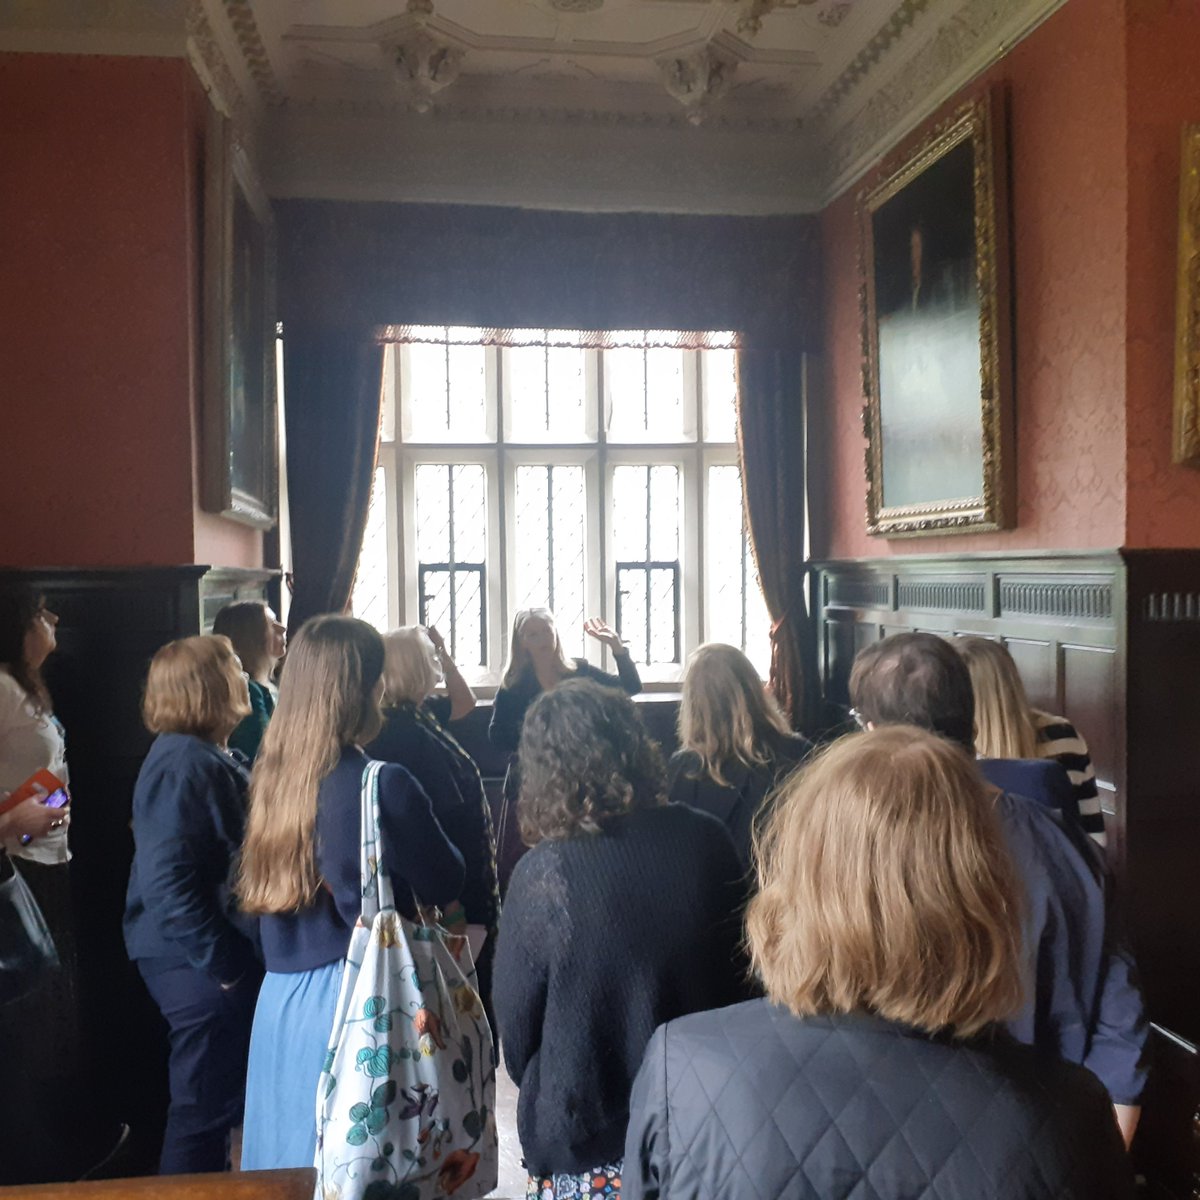 Thanks to everyone who came to #GawthorpeHall and @RBKS_Textiles yesterday for our 17th century study event. Fantastic to hear Catherine MacLeod, one of @NPGLondon's curators sharing her knowledge of the portraits in the Hall.